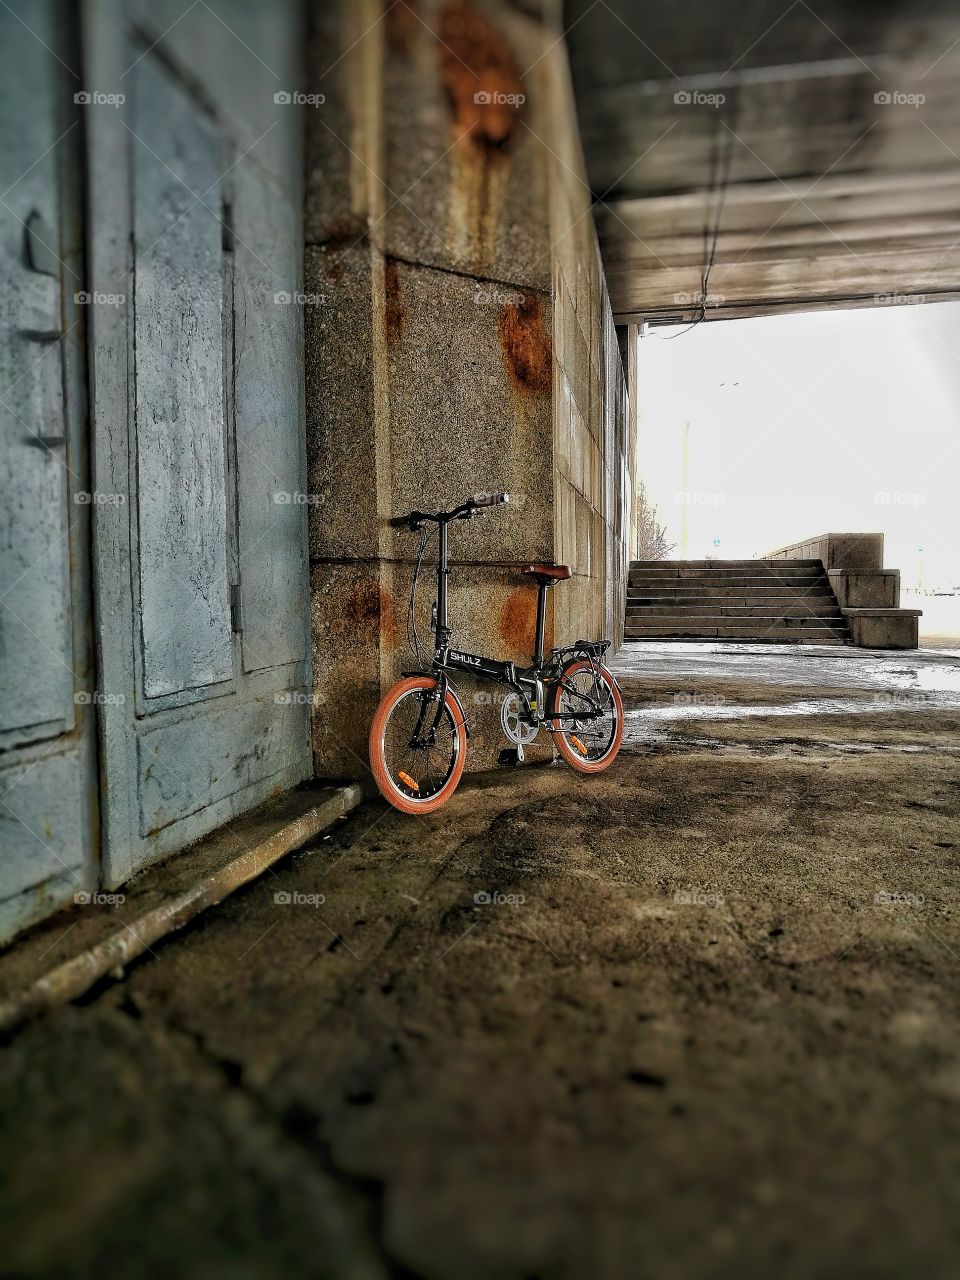 Day no people outdoors illuminated HuaweiP9Photography HuaweiP9 Colors Textured bike